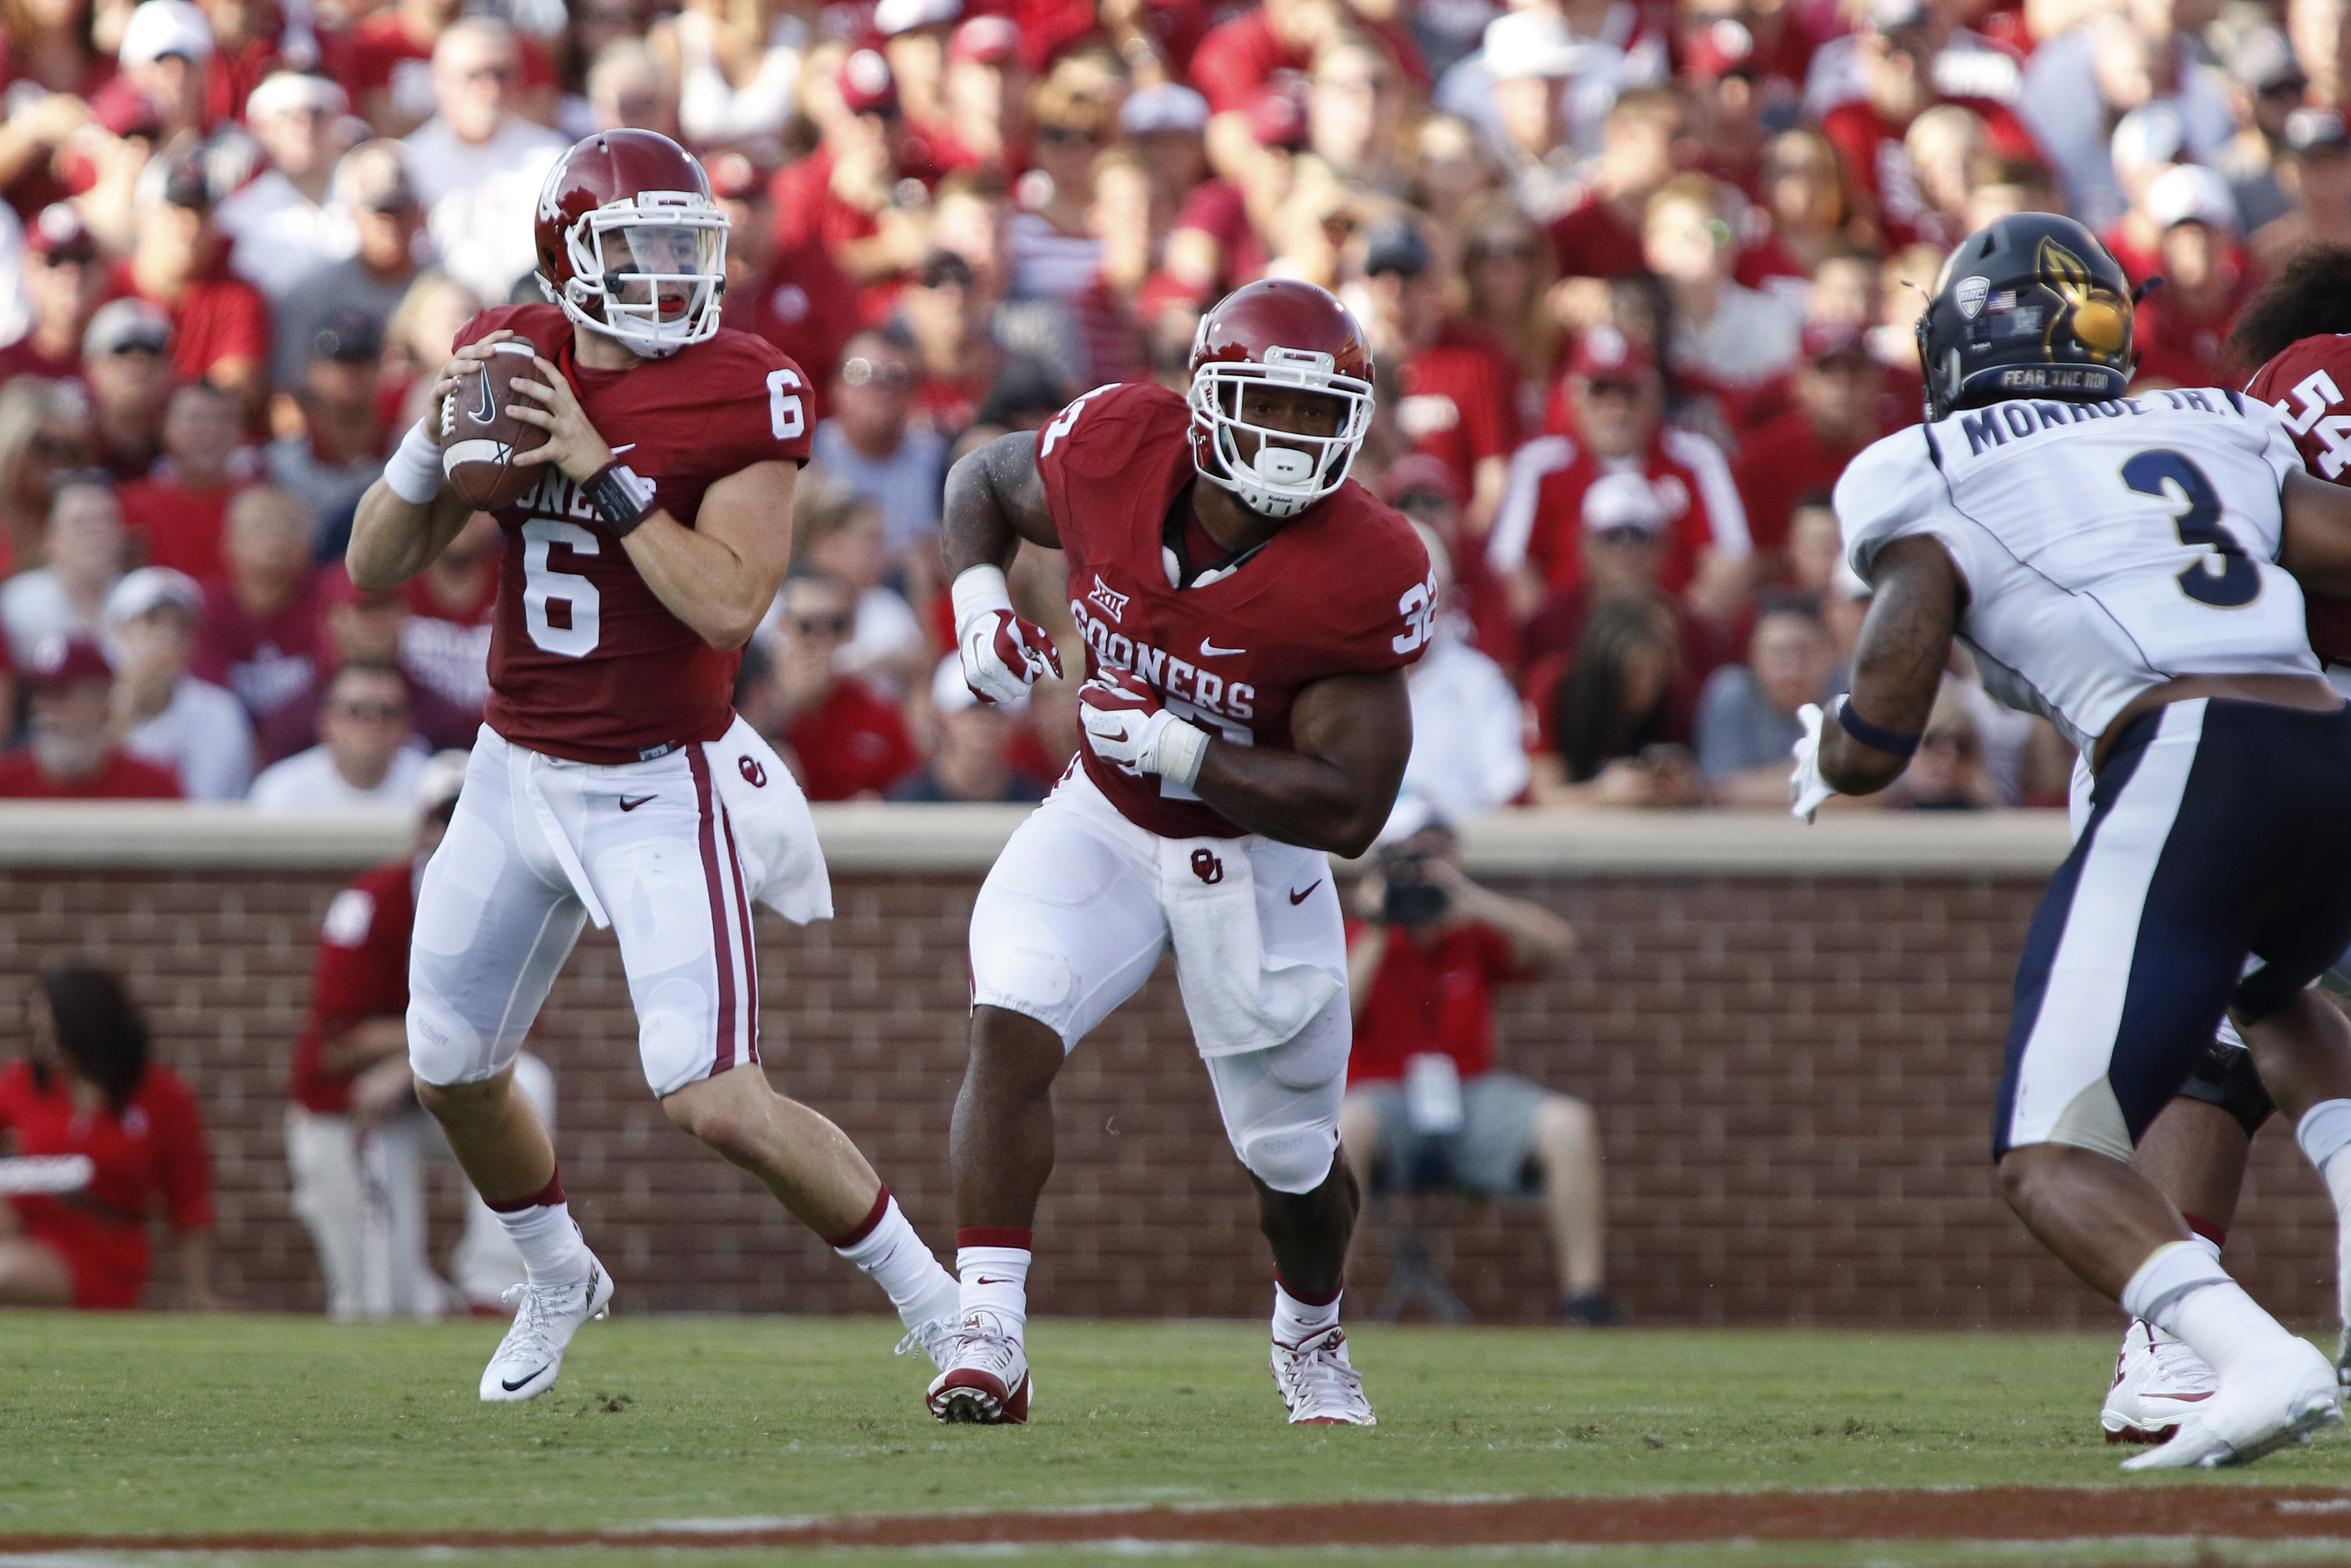 How to Watch Oklahoma vs. Tennessee Live Stream Online